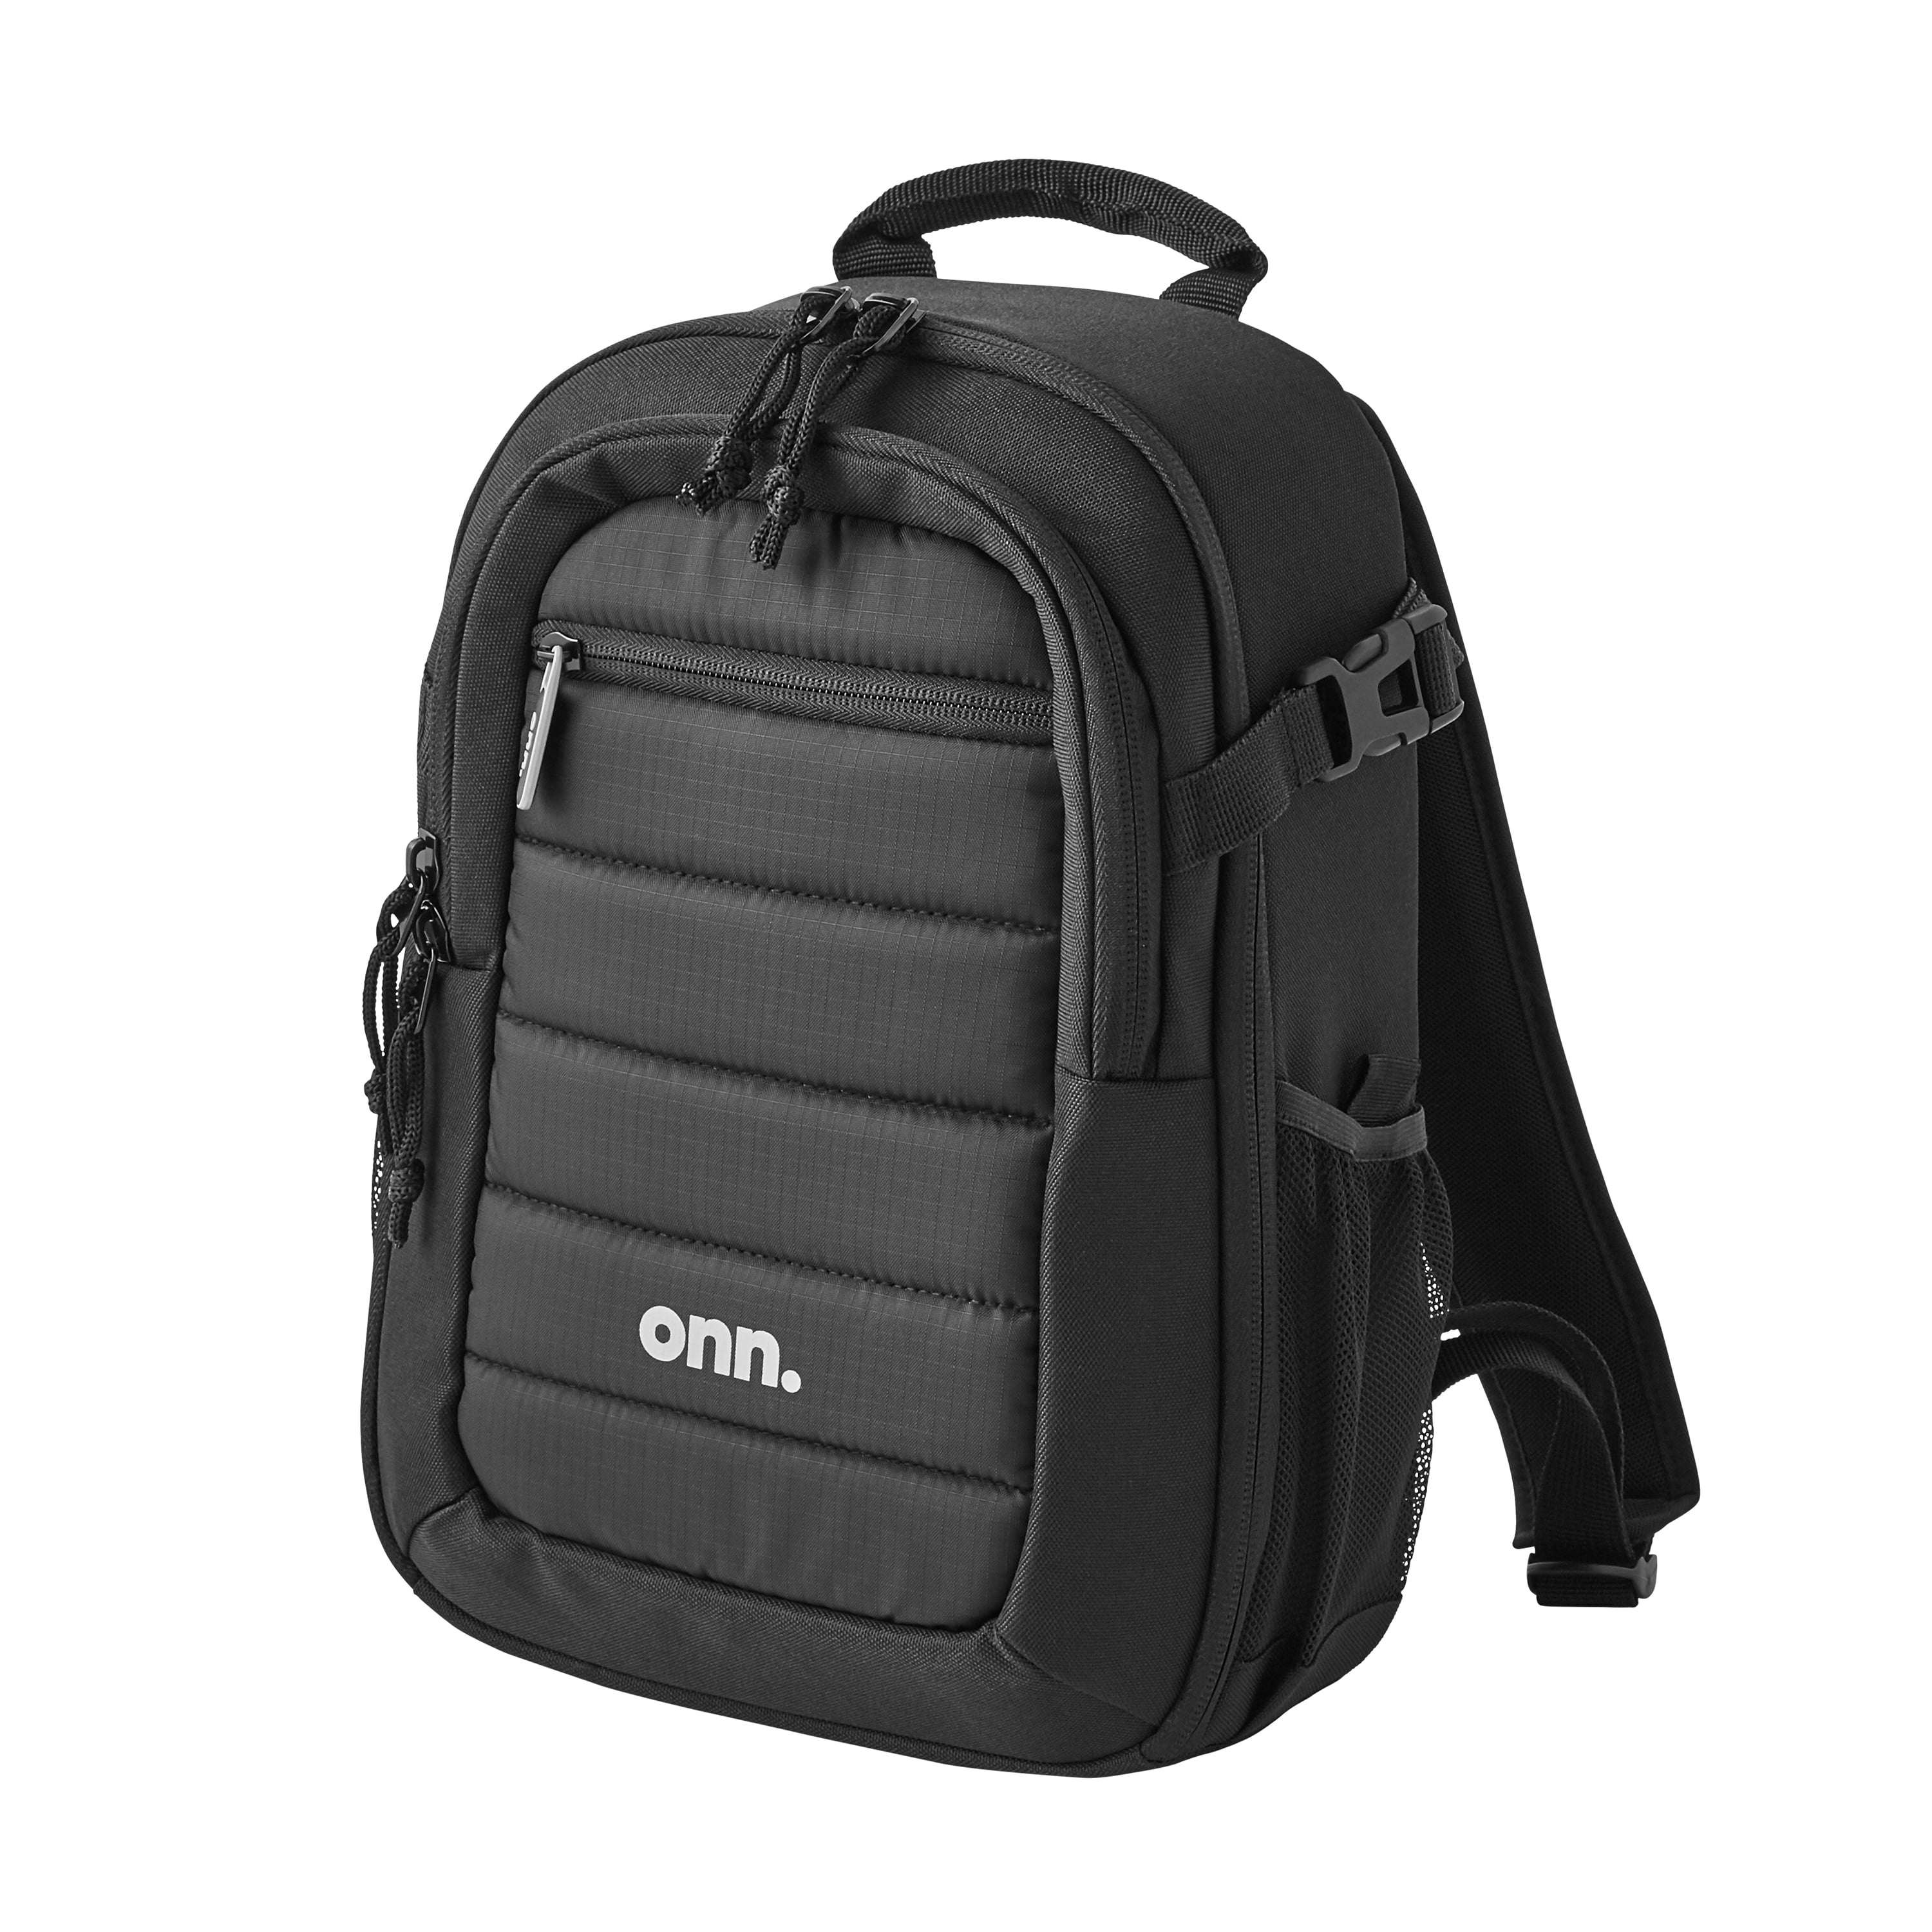 G-raphy Photography Backpack EH-G Green 